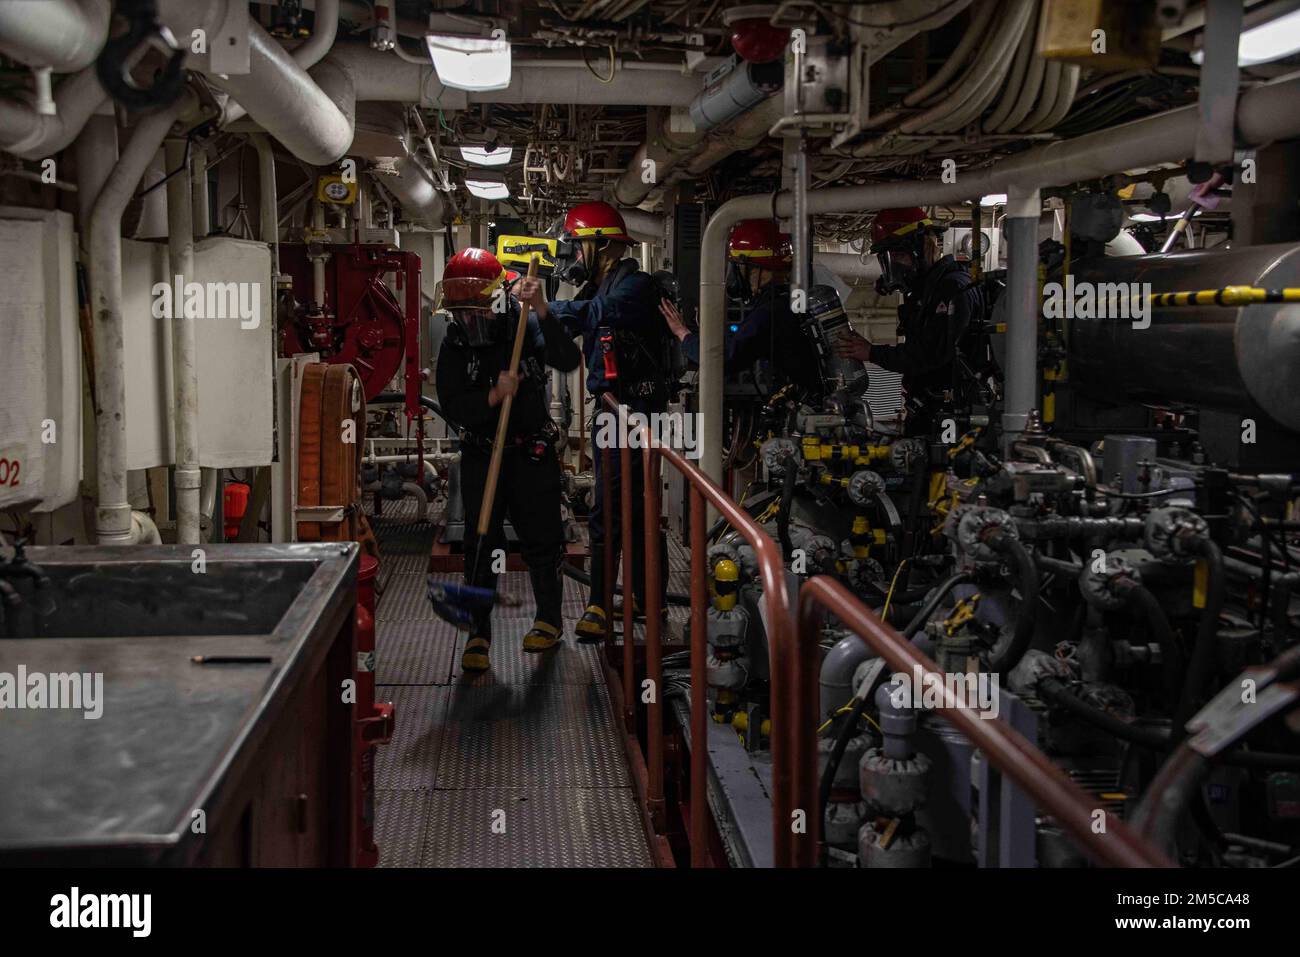 220225-N-XB010-1001 PACIFIC OCEAN (Feb. 25, 2022) Sailors assigned to USS New Orleans (LPD 18) overhaul an engine space during a fire drill. New Orleans, part of the America Amphibious Ready Group, along with the 31st Marine Expeditionary Unit, is operating in the U.S. 7th Fleet area of responsibility to enhance interoperability with allies and partners and serve as a ready response force to defend peace and stability in the Indo-Pacific region. Stock Photo